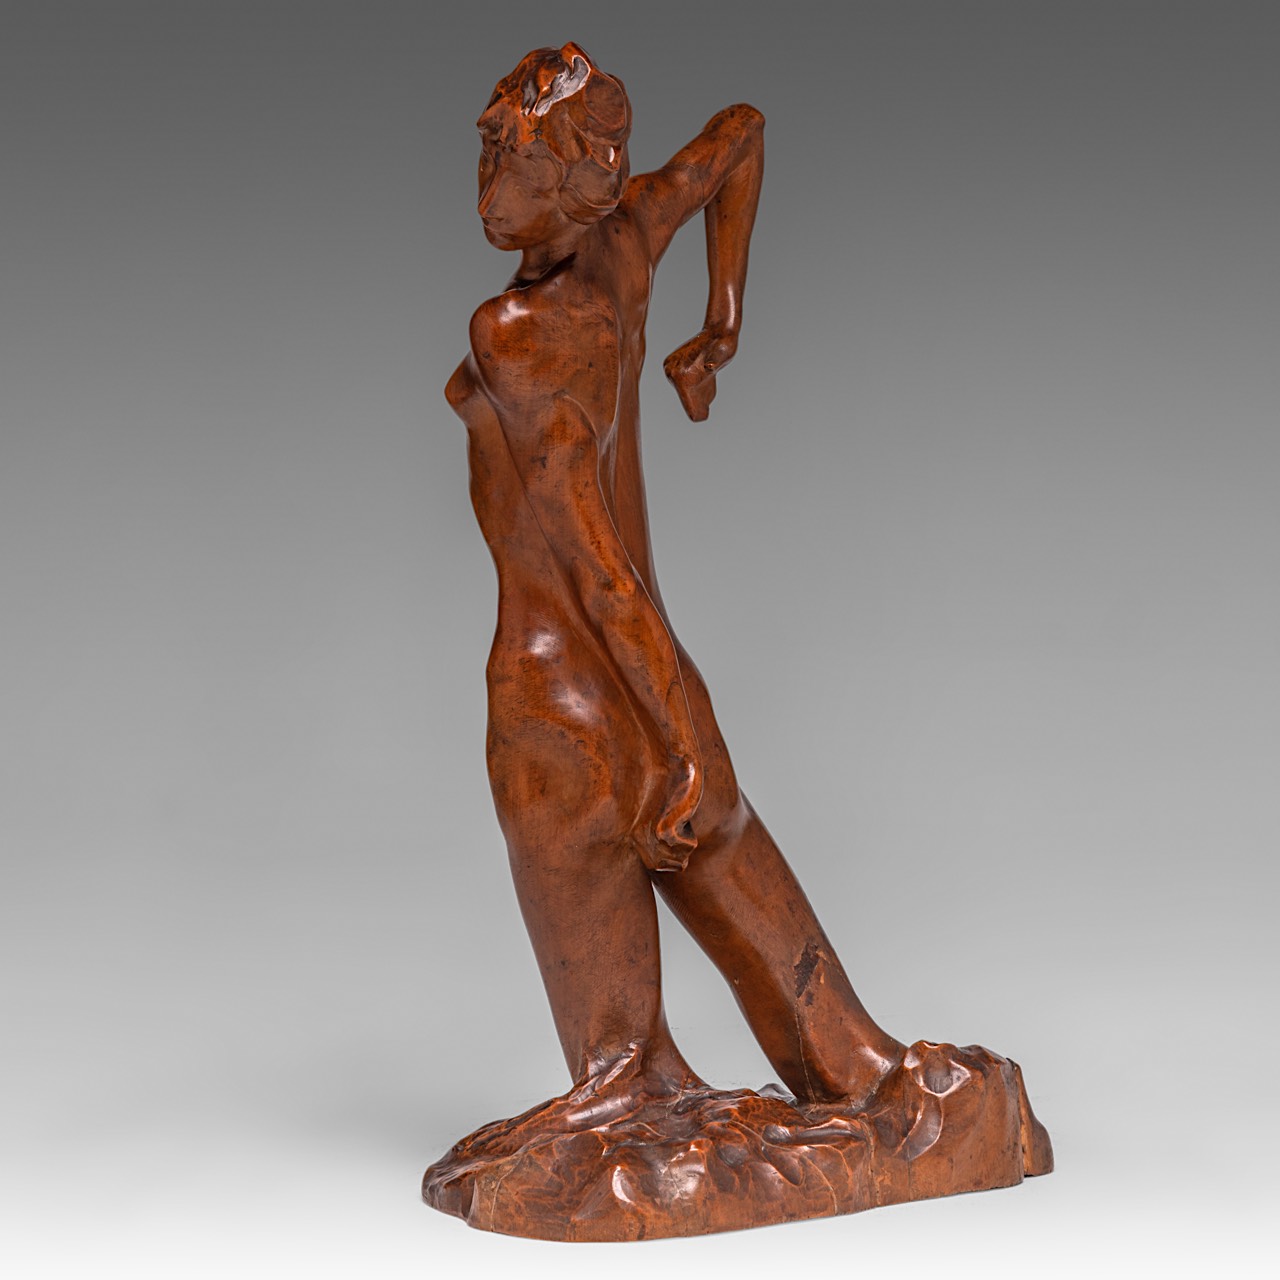 George Minne (1866-1941), 'Baigneuse I', carved wood, H 40 cm - Image 4 of 10